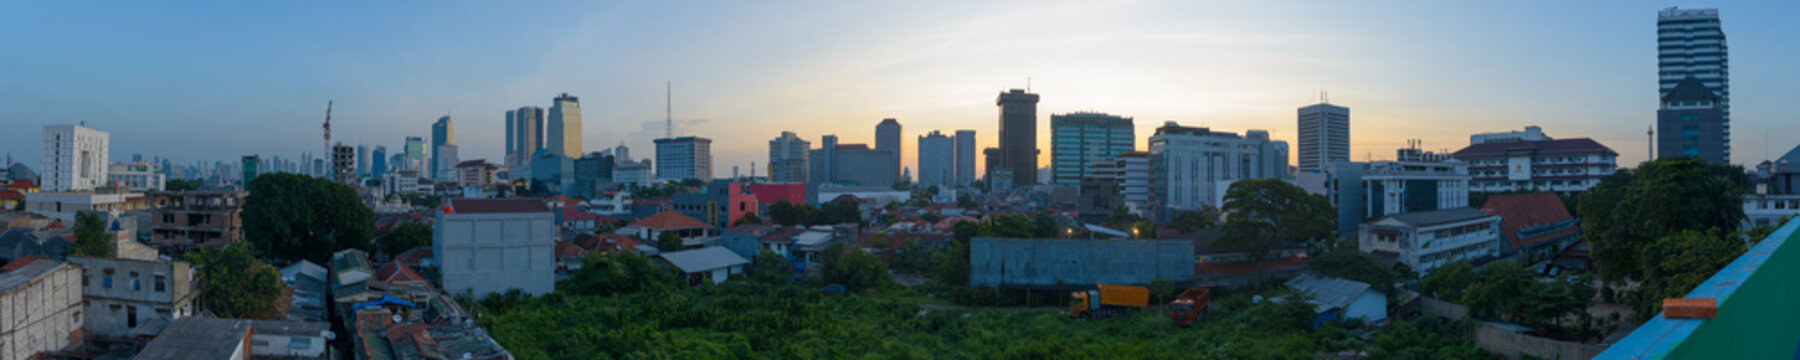 Panorama shot of central Jakarta at sunset, Java, Indonesia